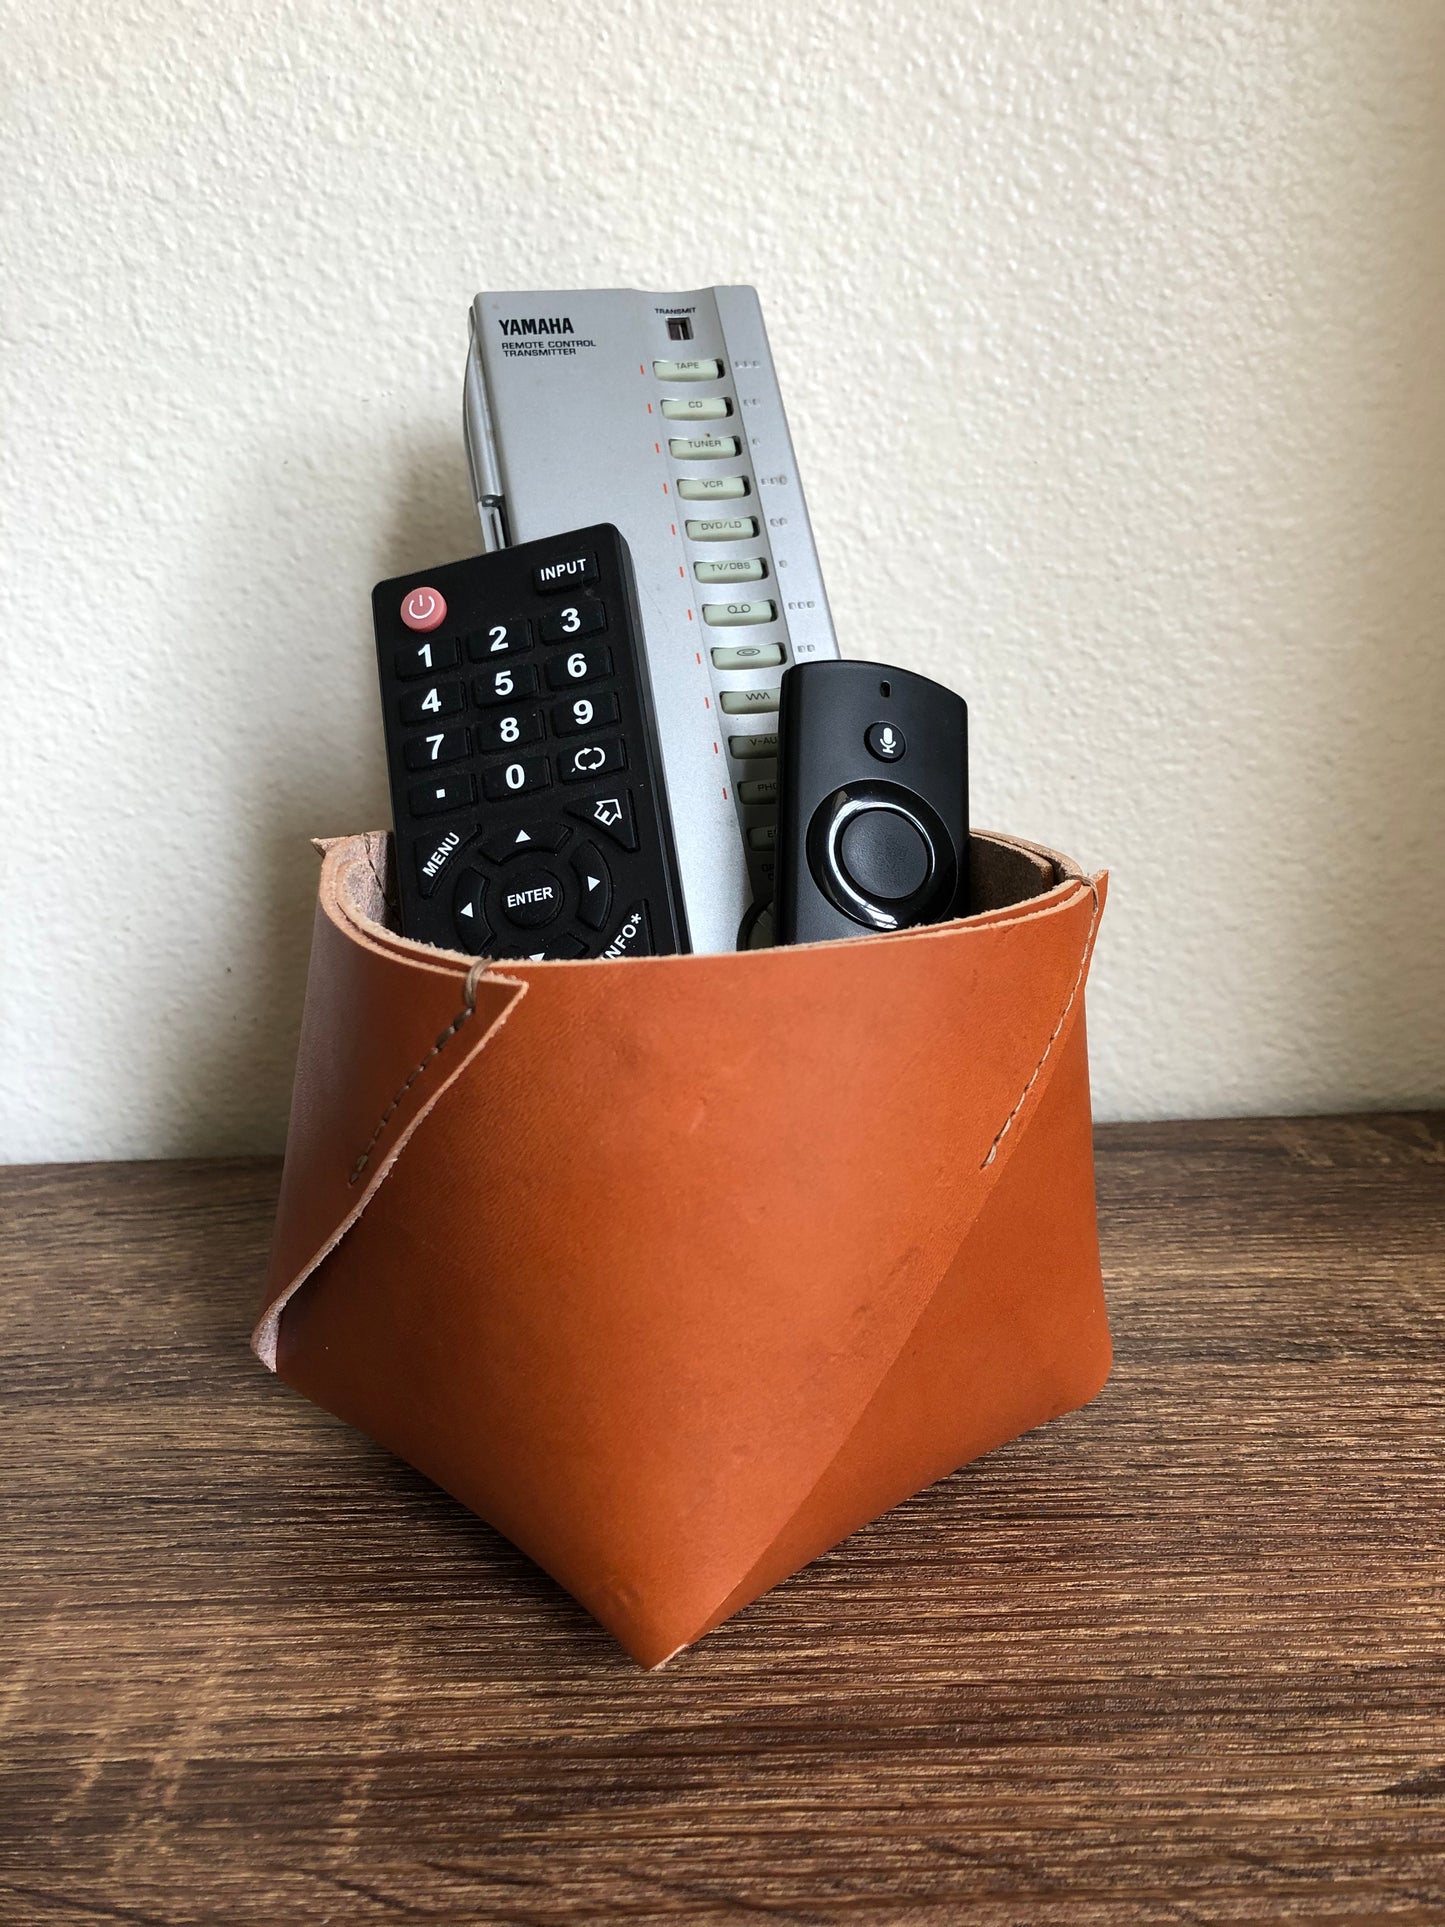 Leather Planter | Leather Storage Container | Small Leather Box | Leather Home Gift